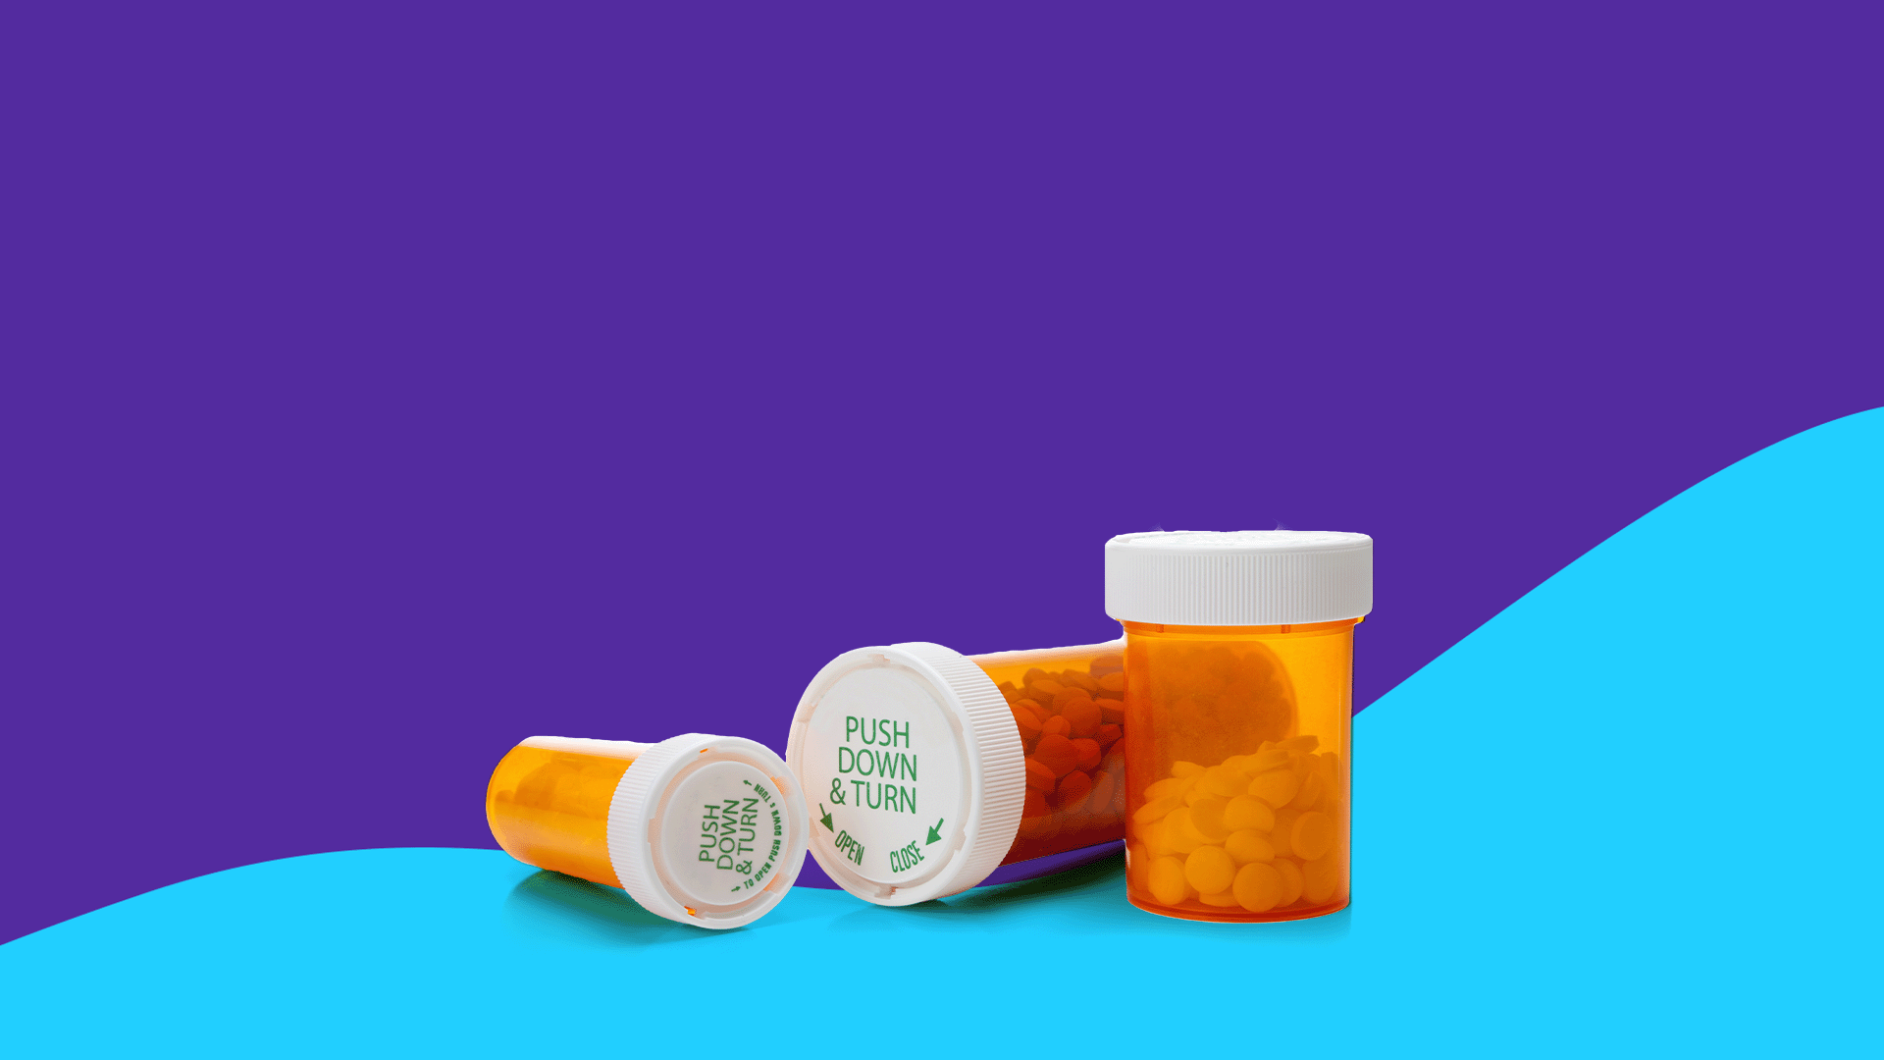 Rx pill bottles: How much is bupropion HCl ER XL without insurance